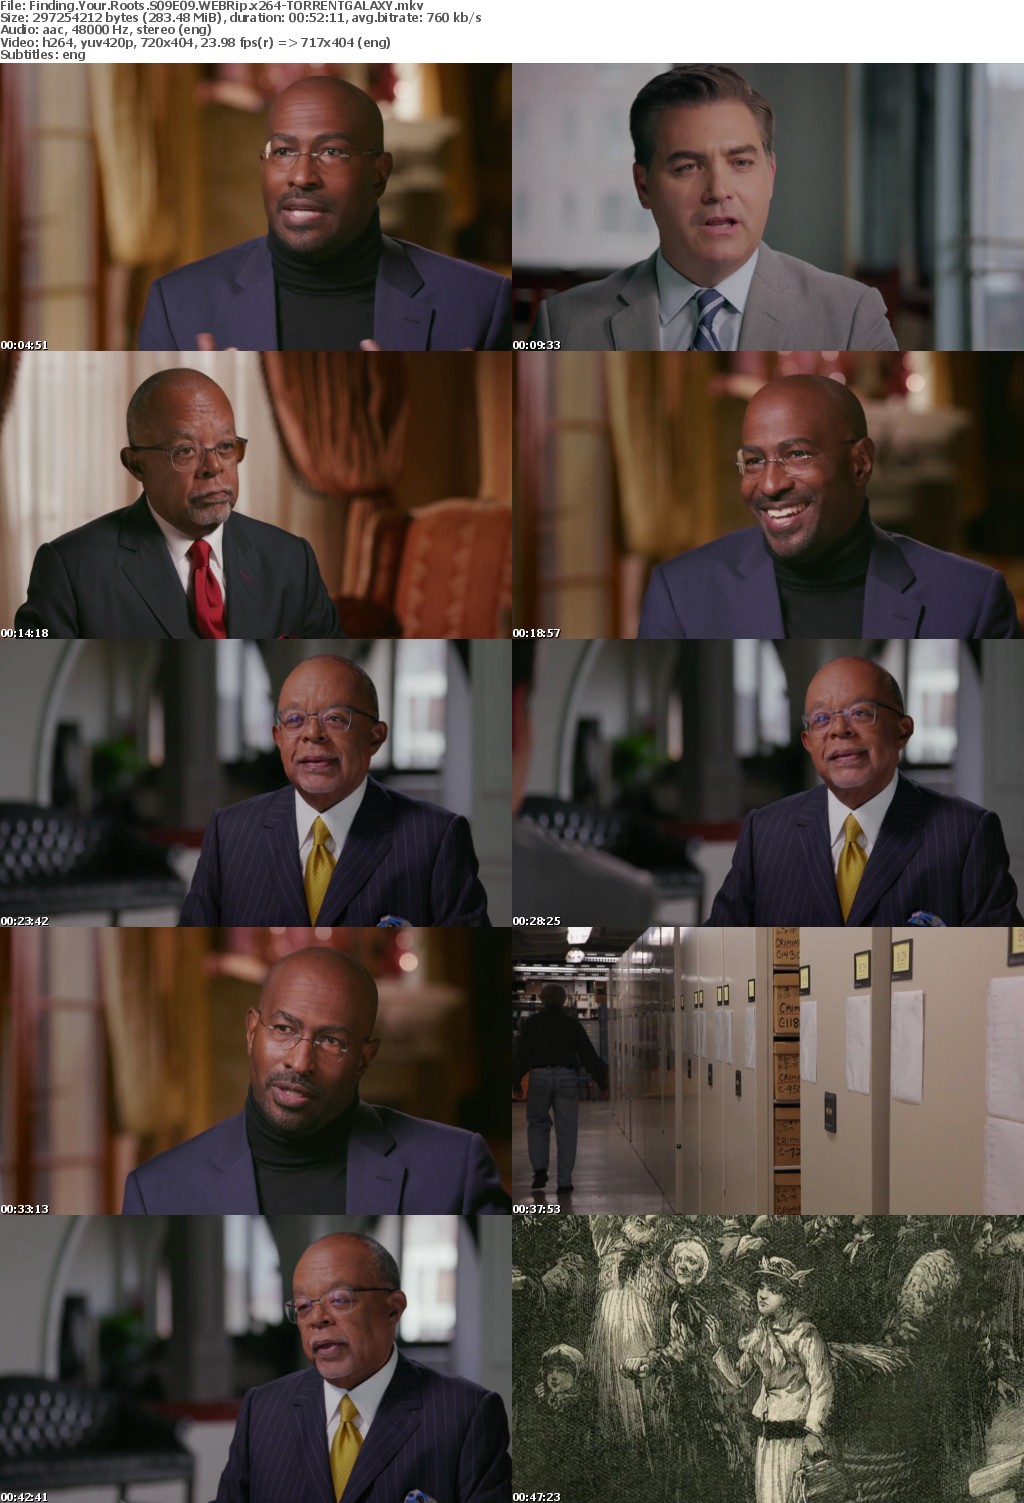 Finding Your Roots S09E09 WEBRip x264-GALAXY